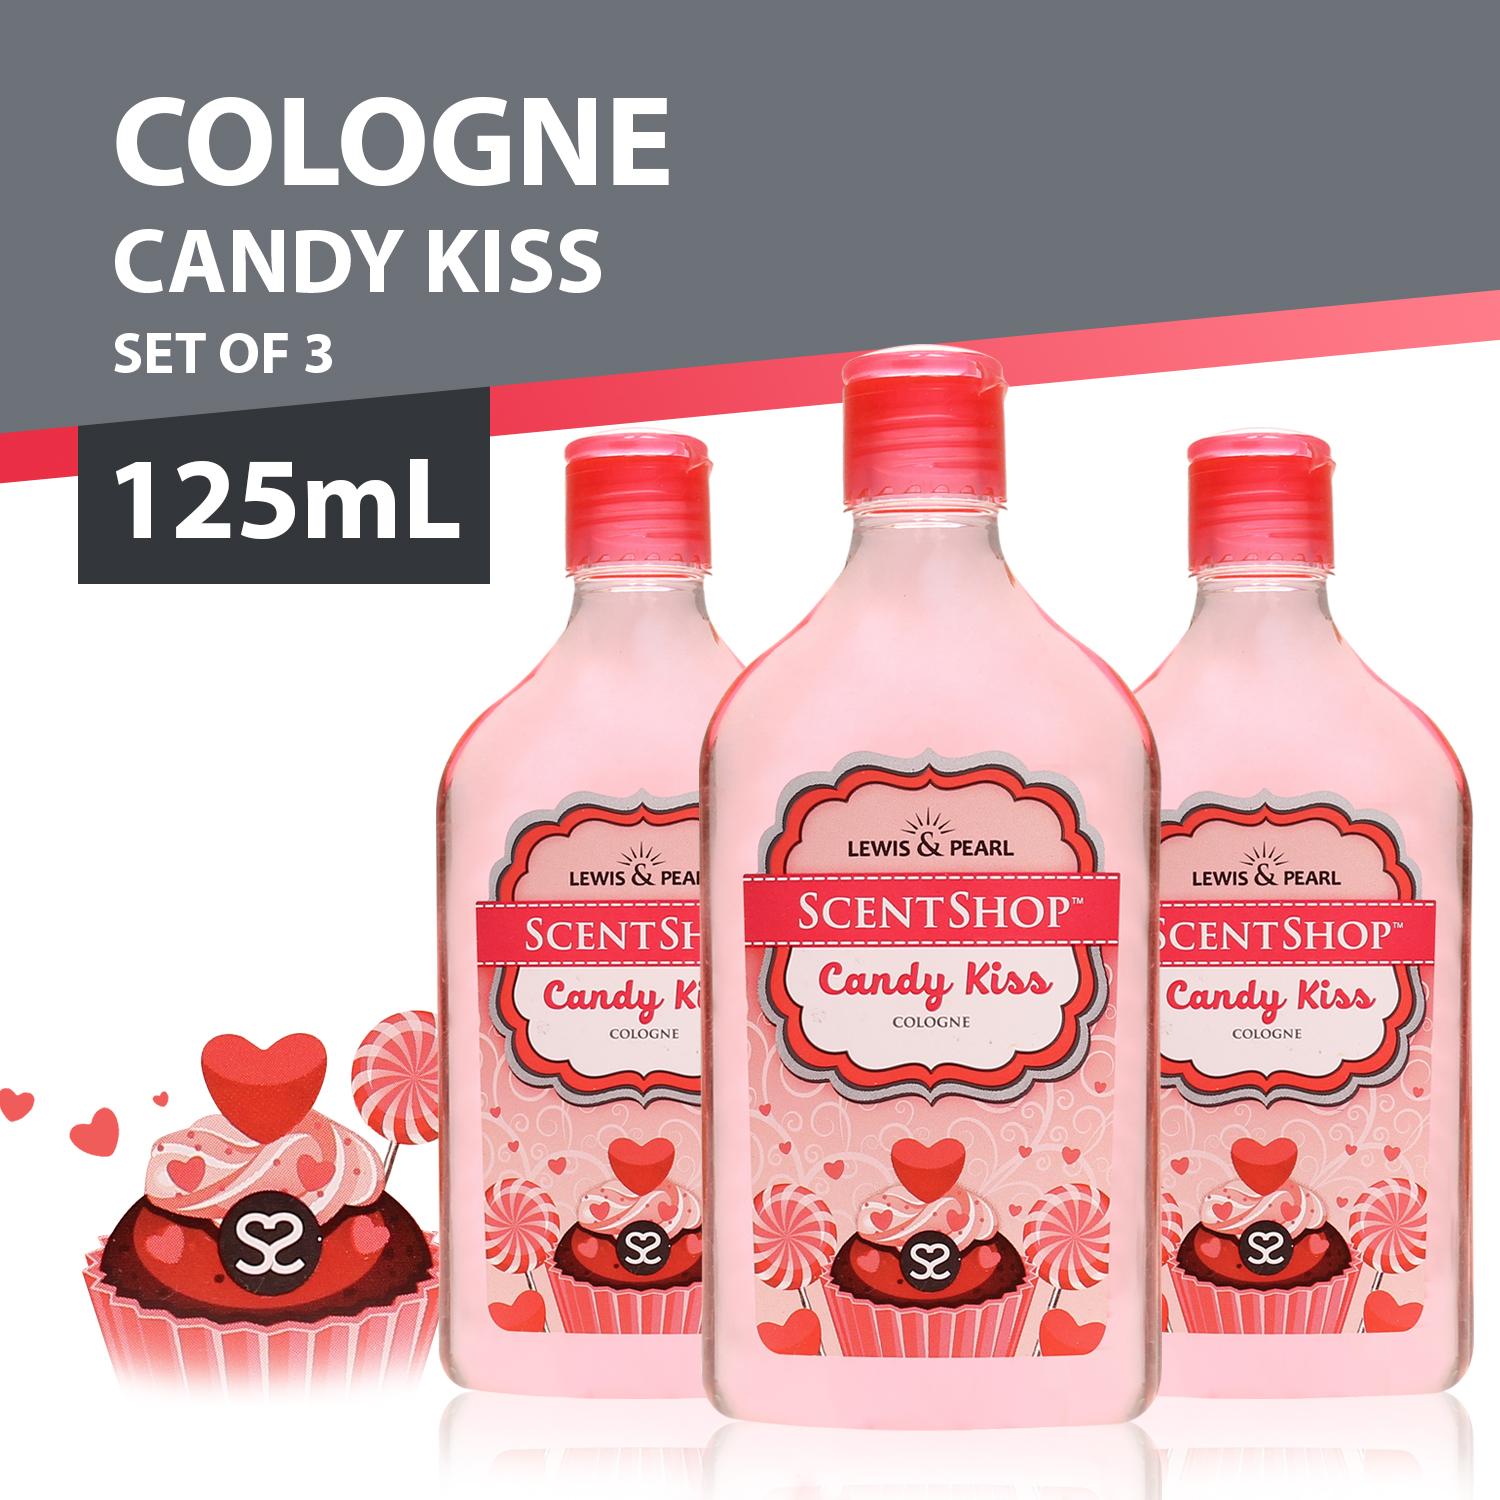 Lewis & Pearl ScentShop Cologne Candy Kiss (125ml) Set of 3